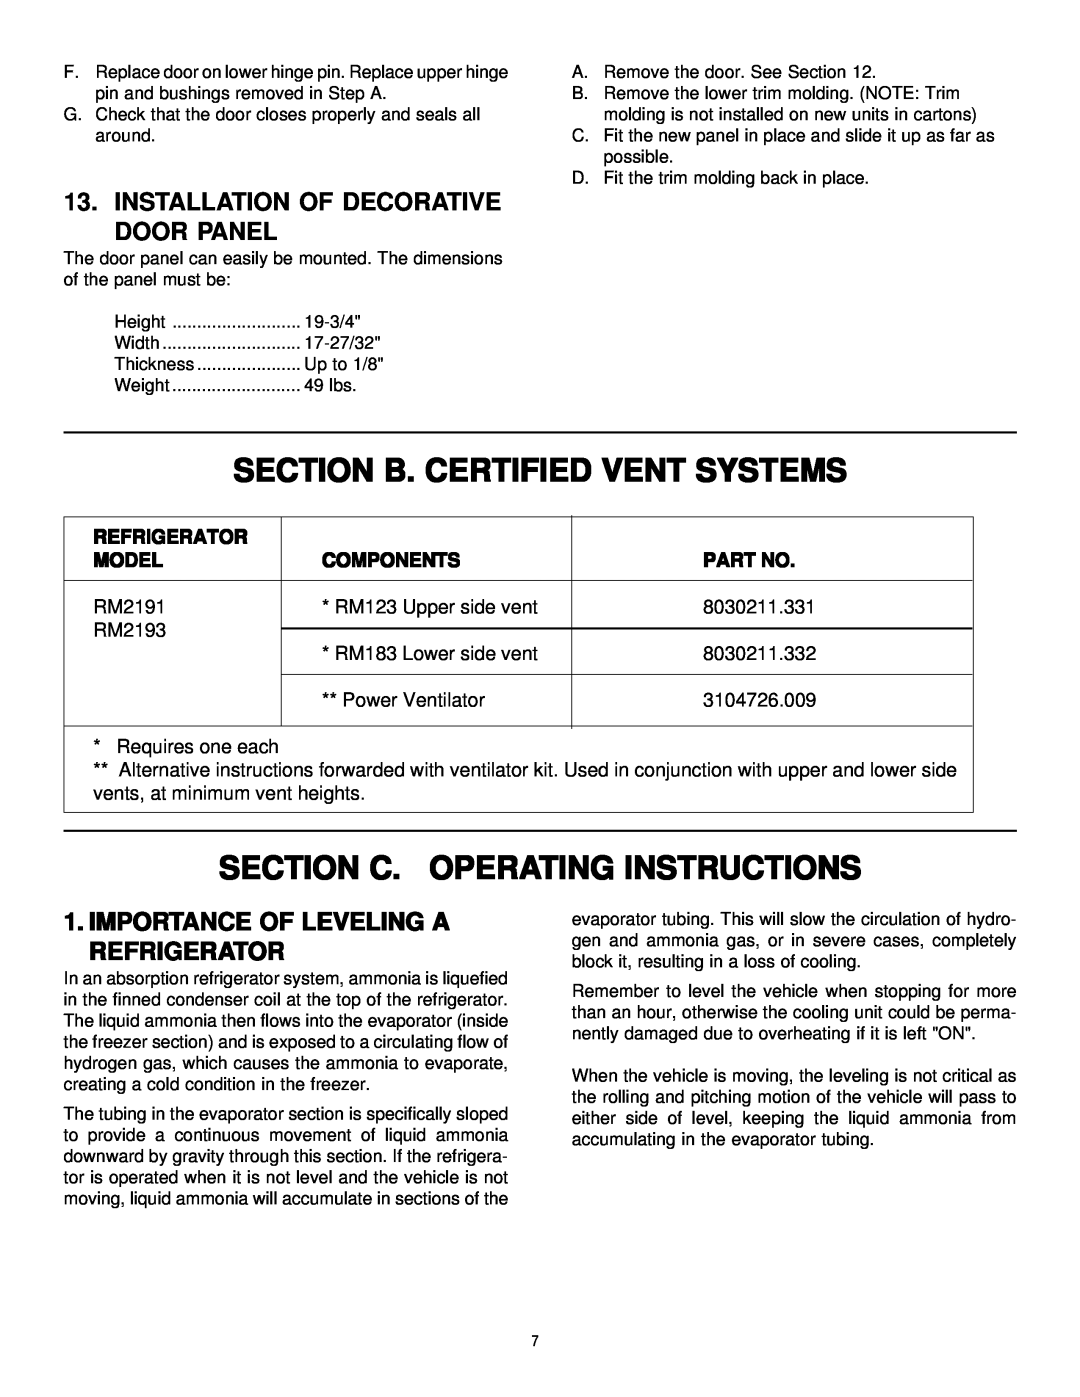 Dometic RM2191 & RM2193 manual Section B. Certified Vent Systems, Section C. Operating Instructions, Refrigerator, Model 